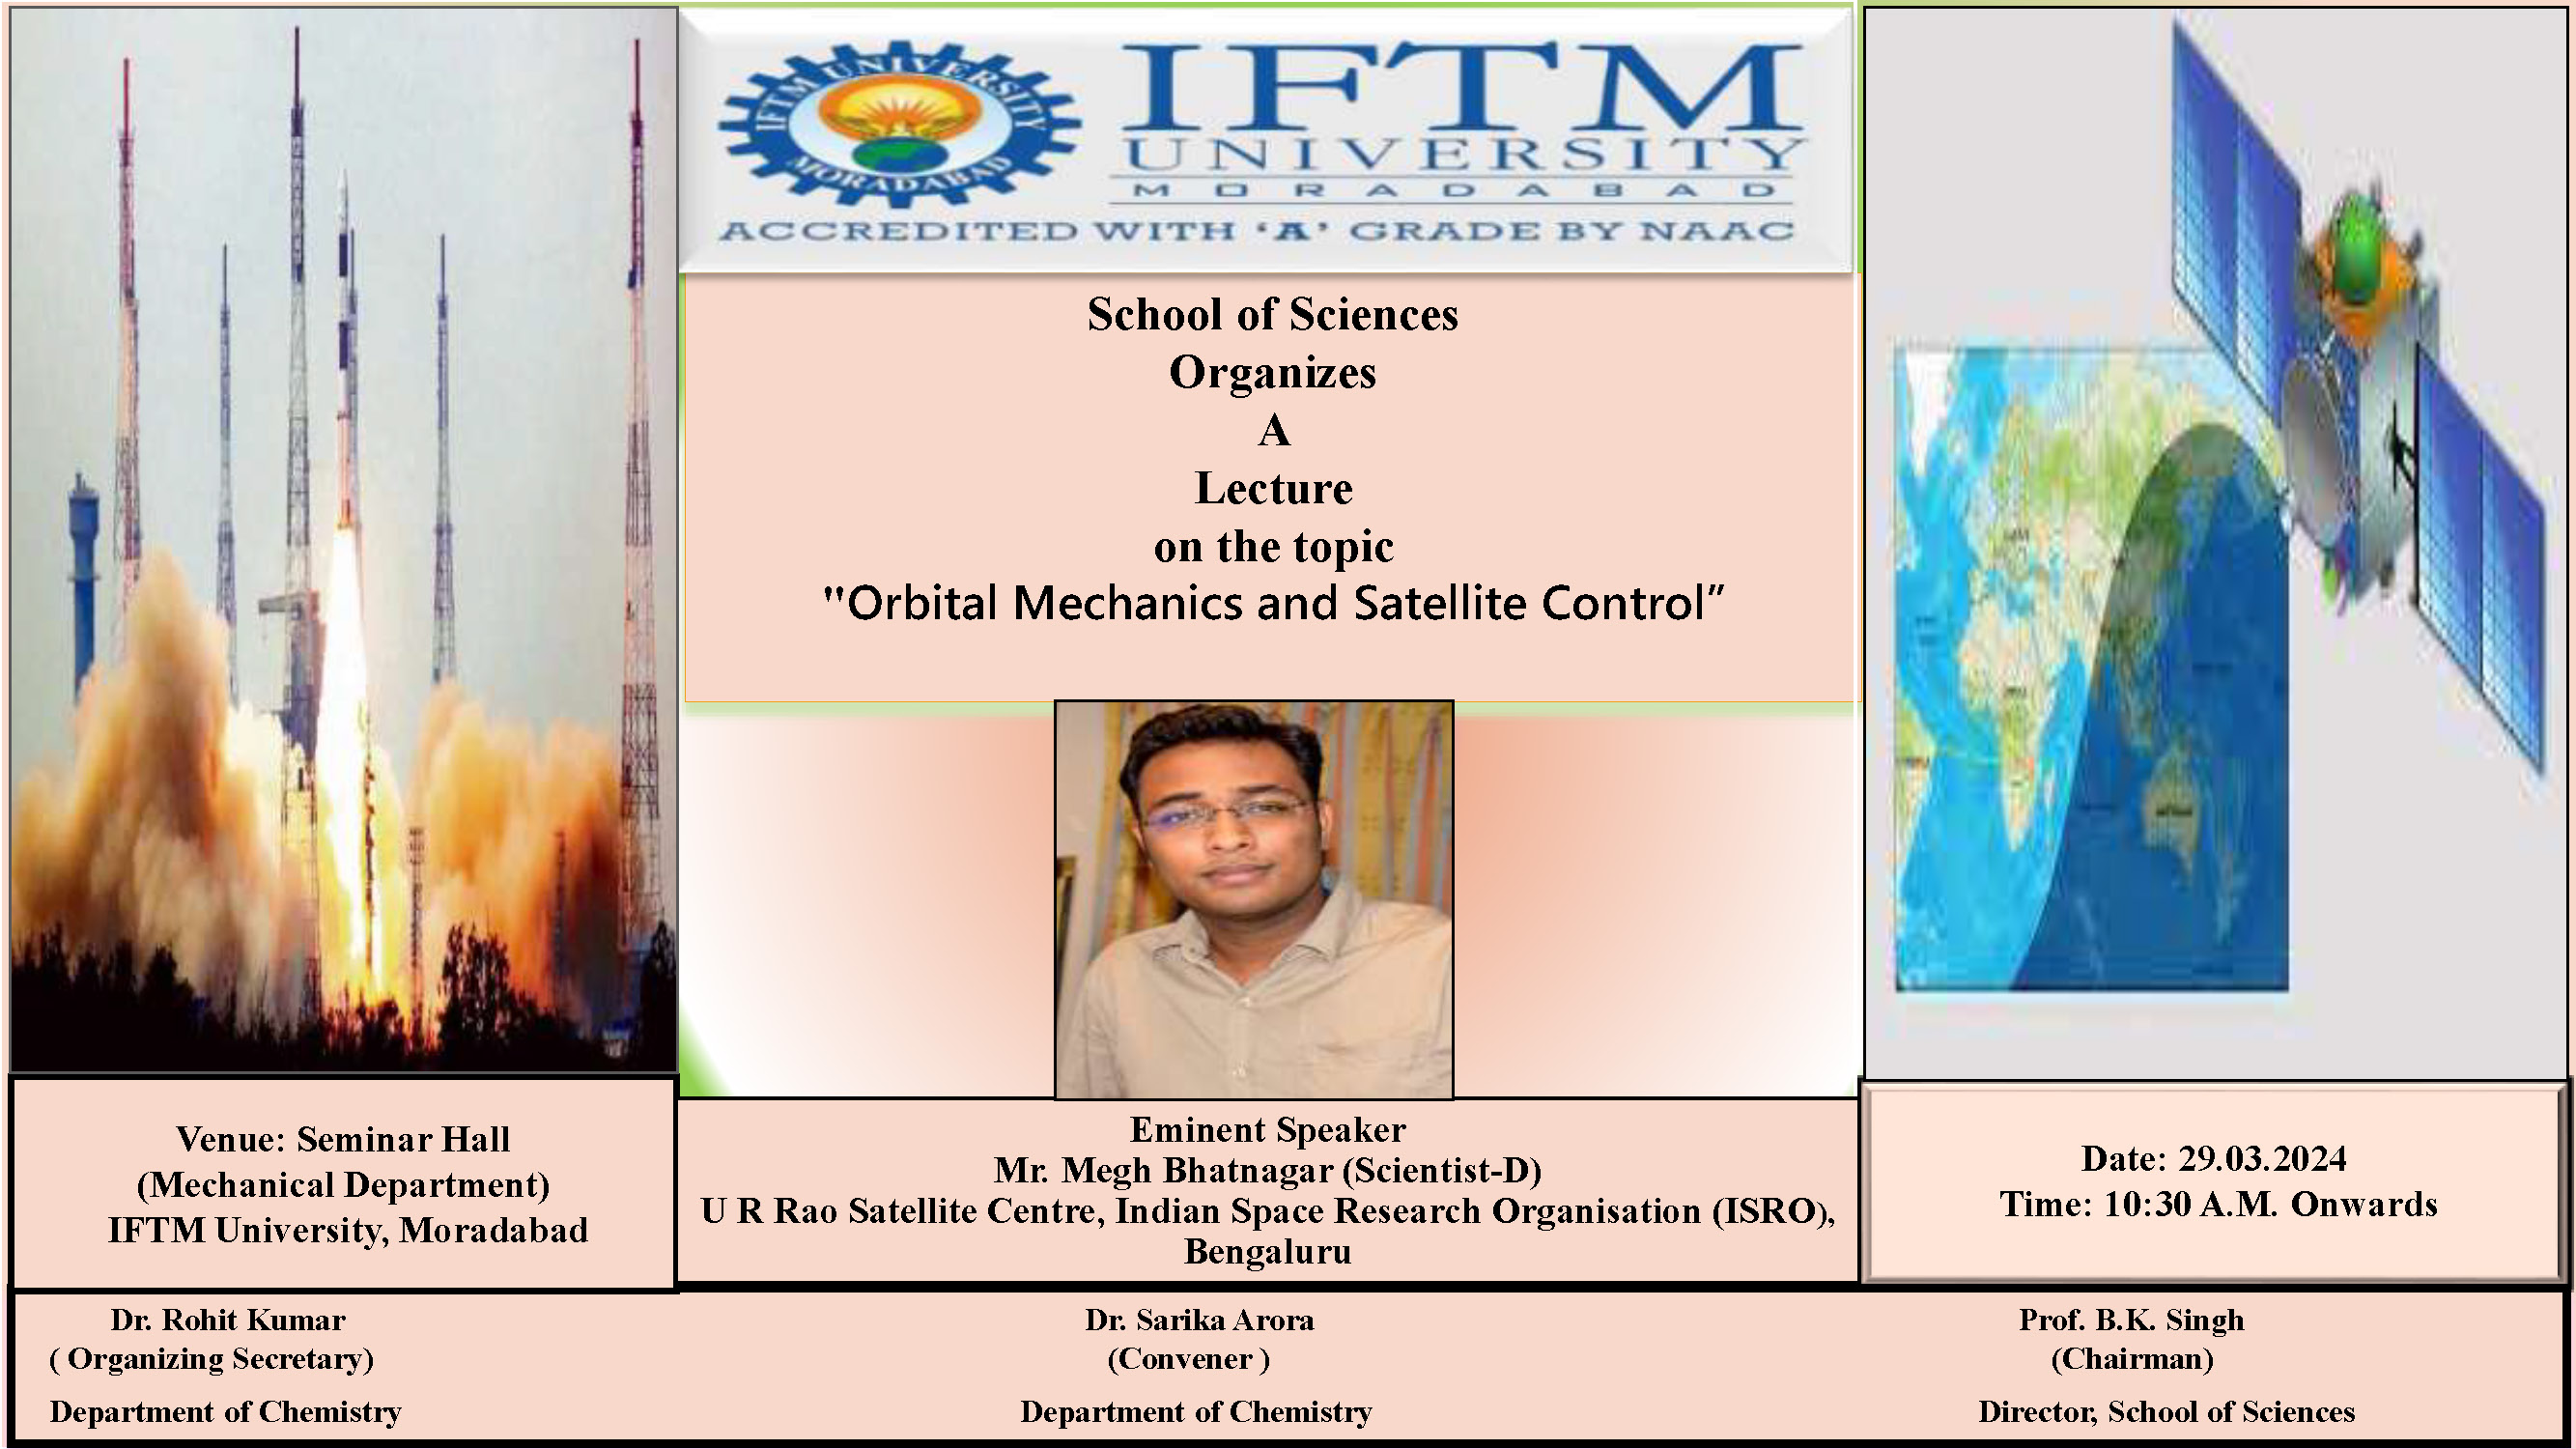 Organizes A Lecture on the topic Orbital Mechanics and Satellite Control